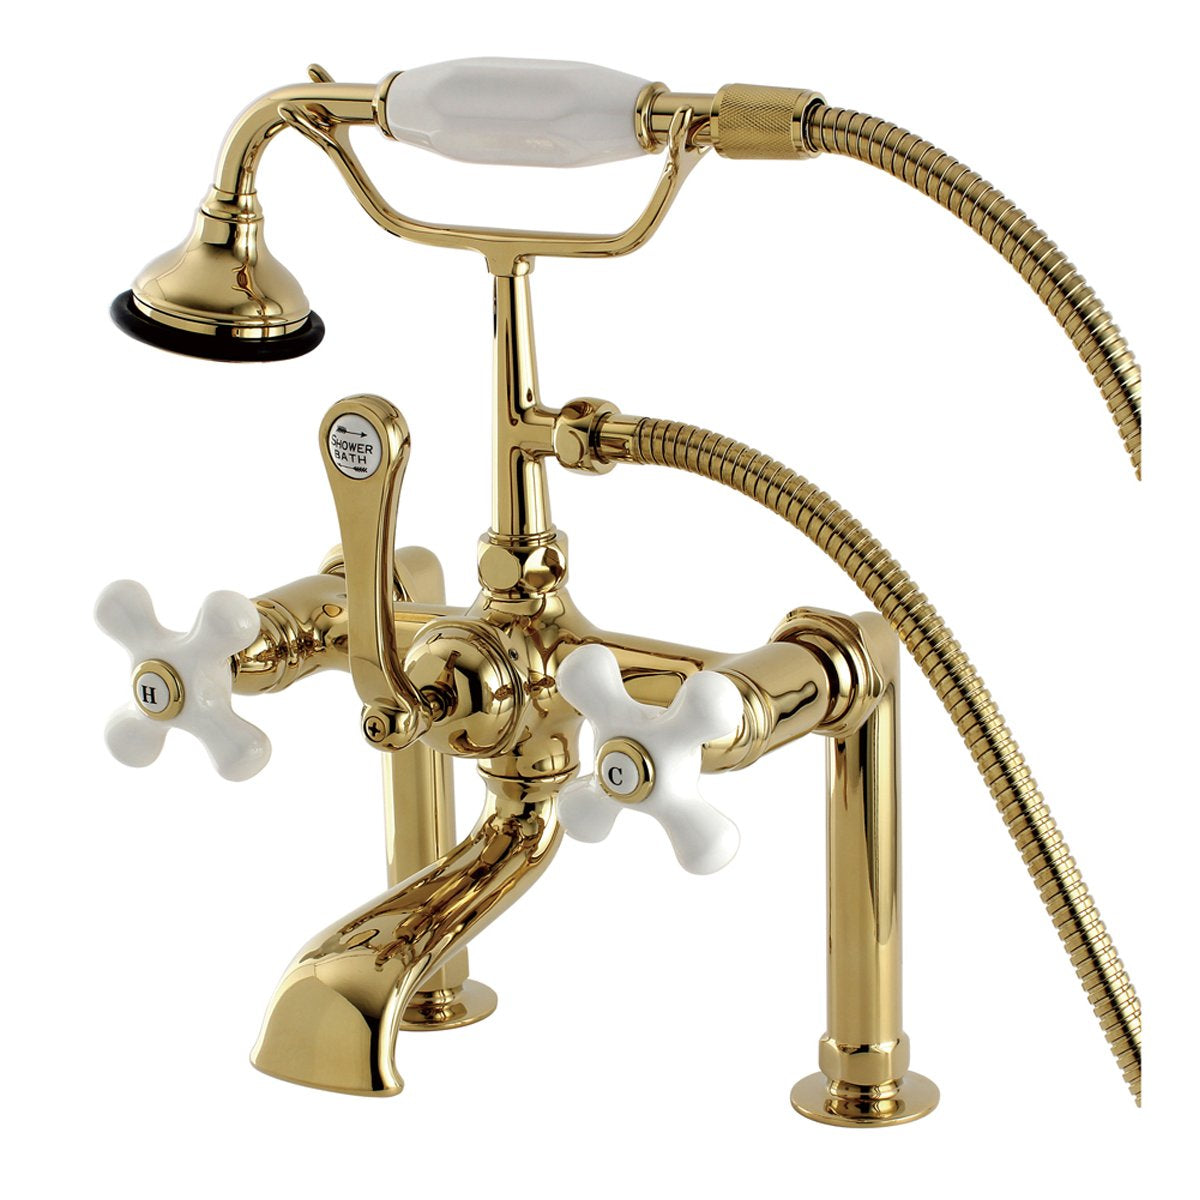 Kingston Brass Aqua Eden Vintage Deck Mount Clawfoot Brass Tub Faucet with Porcelain Lever Handle-Tub Faucets-Free Shipping-Directsinks.